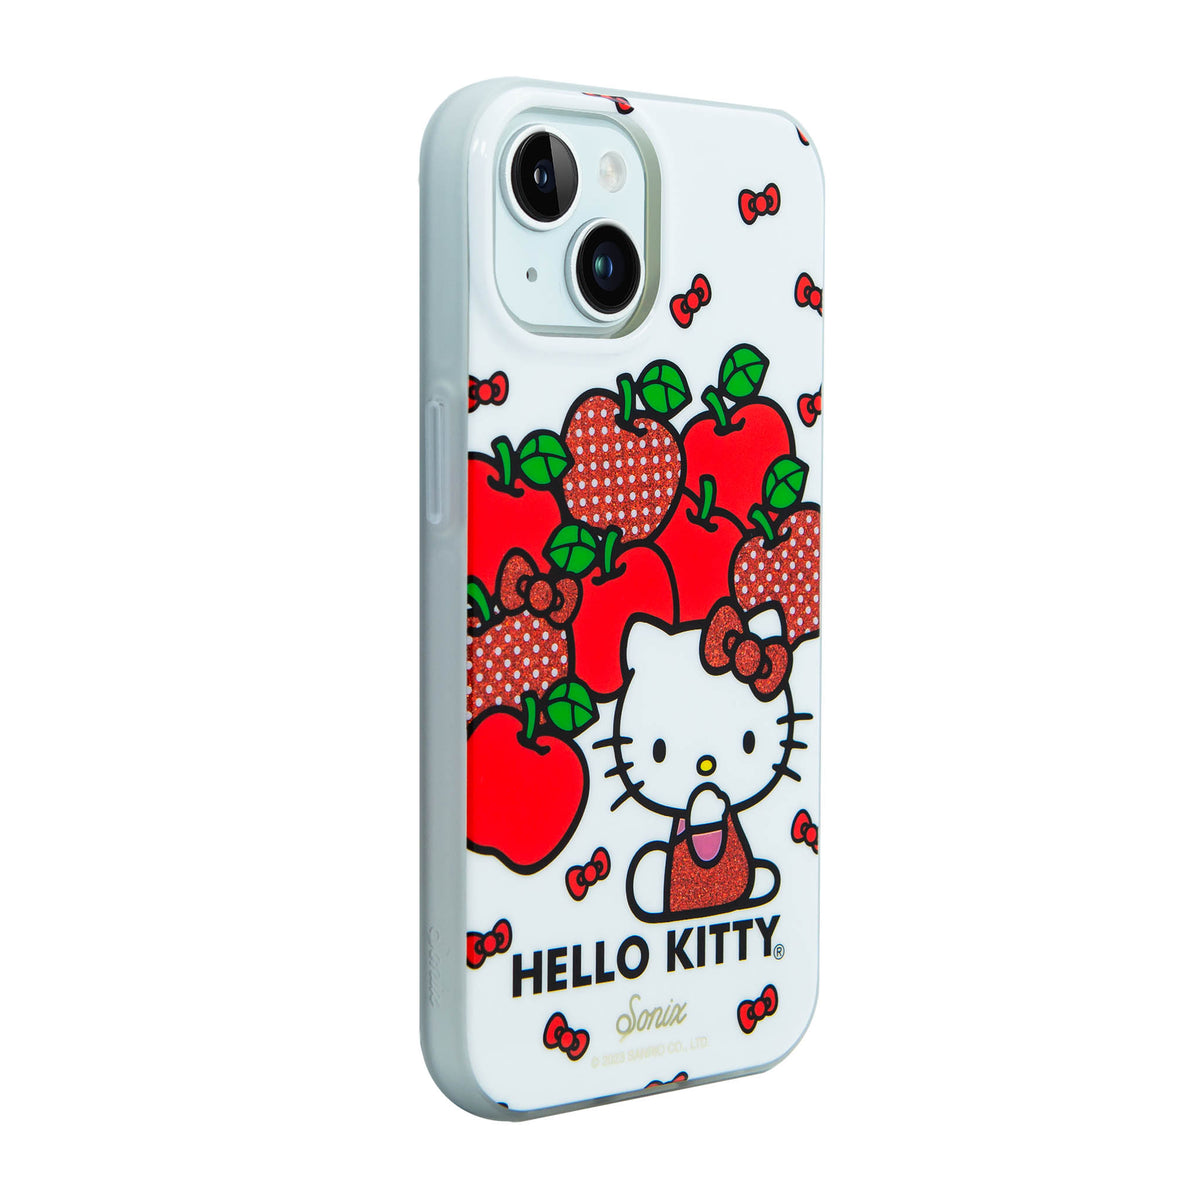 Hello Kitty x Sonix Apples to Apples iPhone Case Accessory BySonix Inc.   